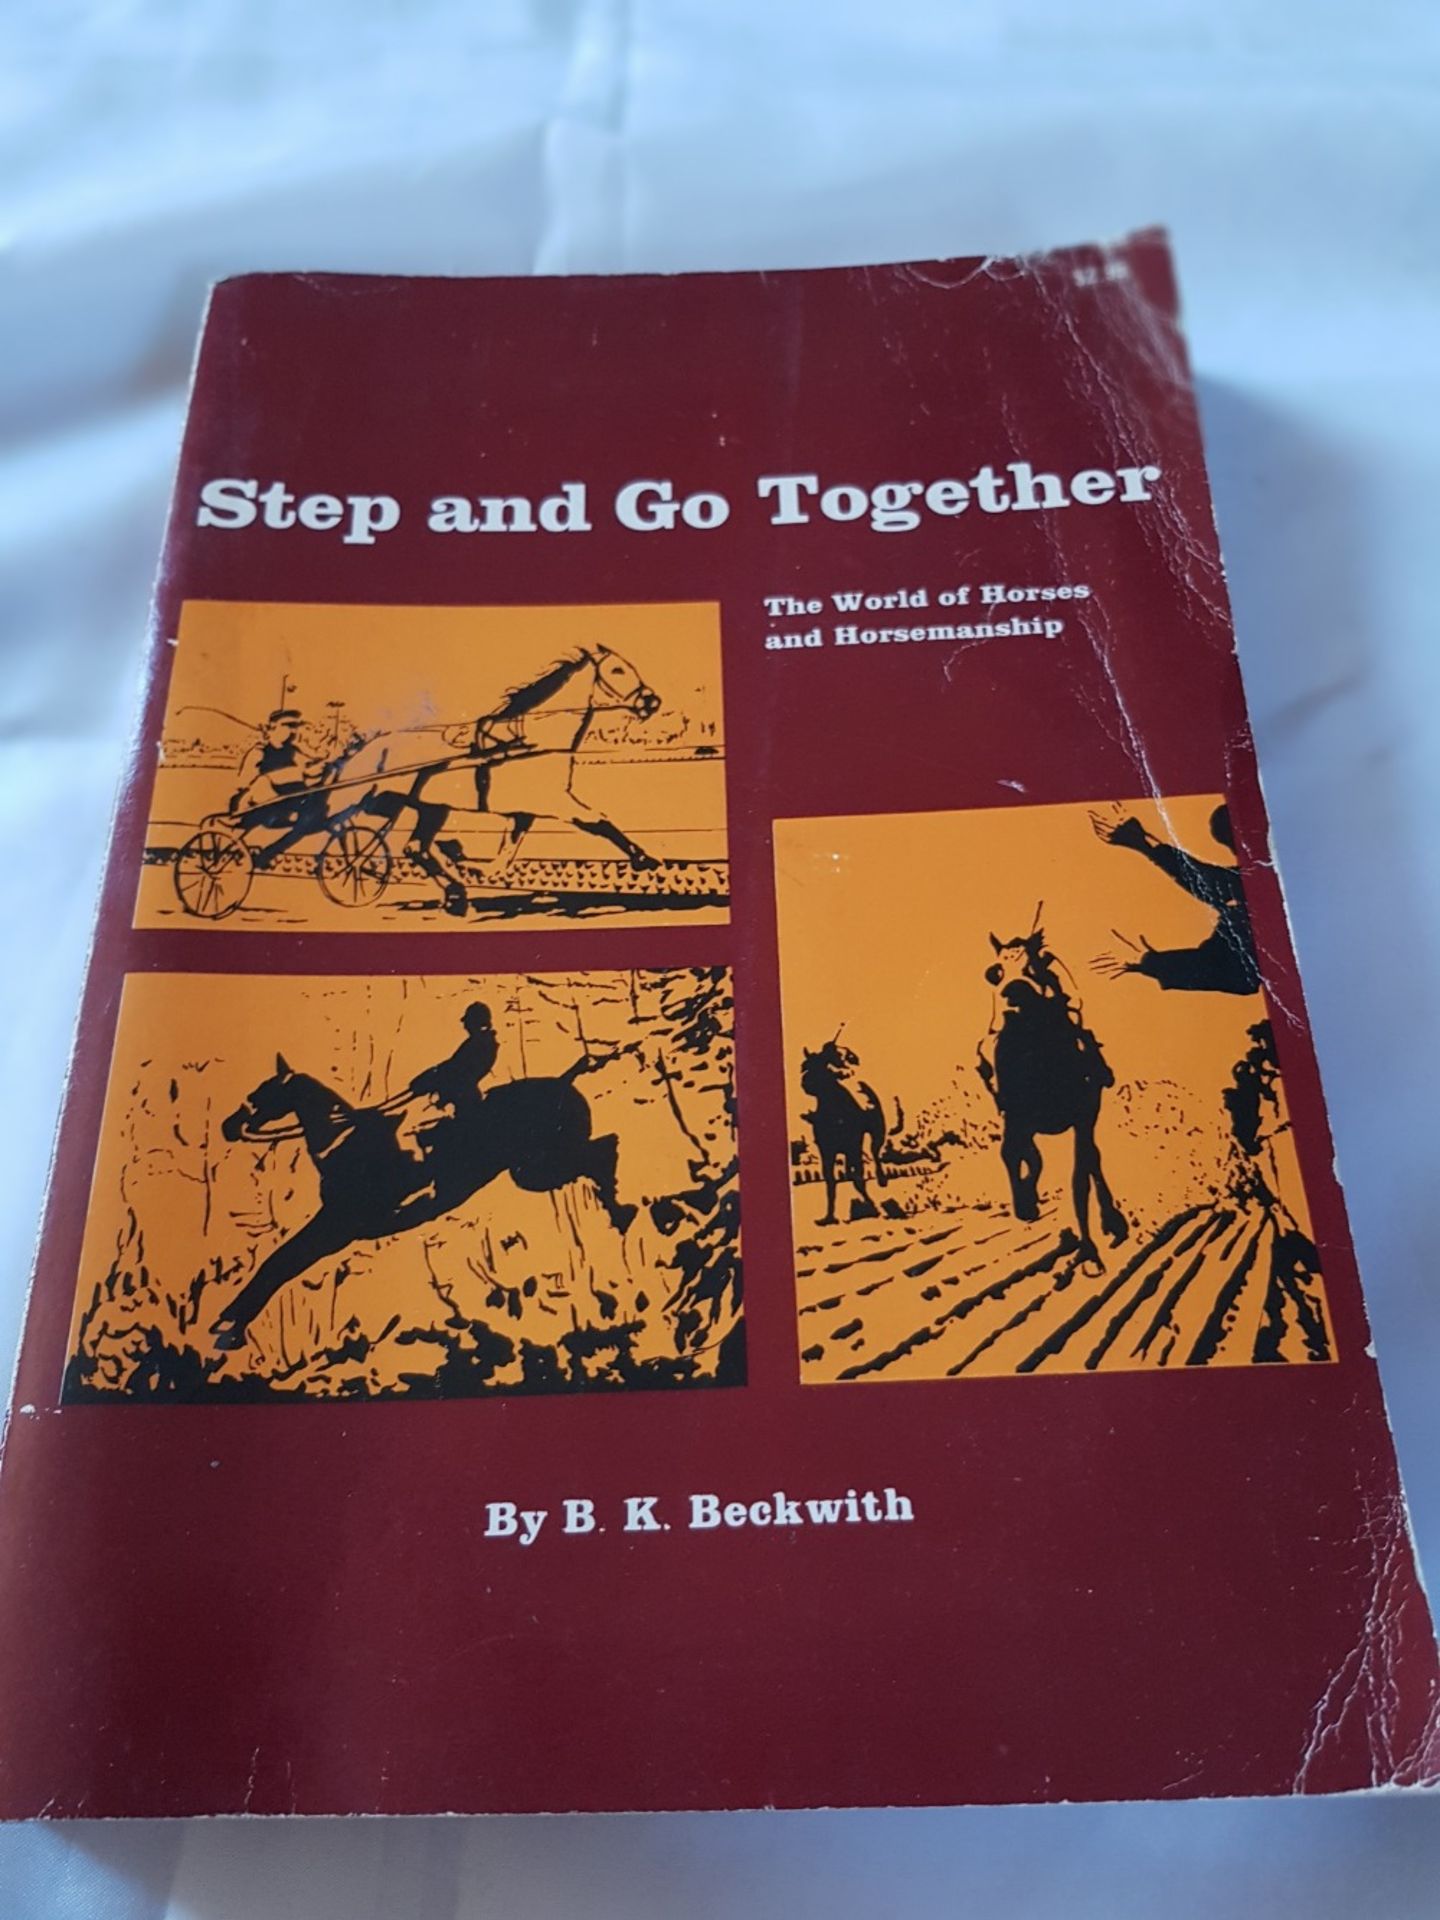 Step and Go Together by B.K. Beckwith